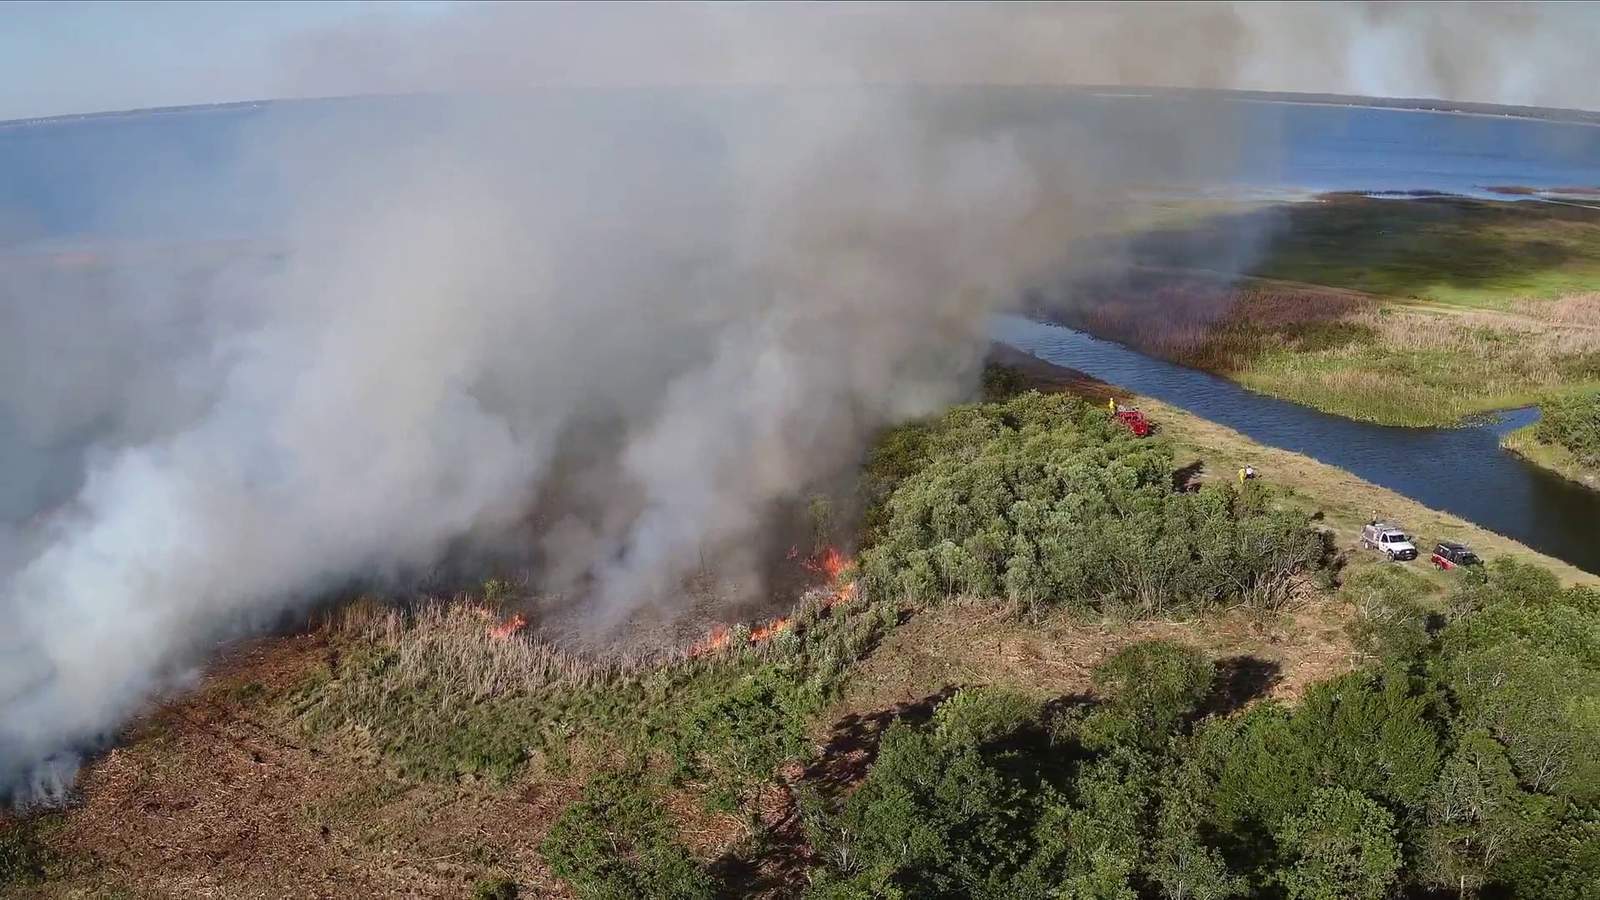 Drone video shows Osceola firefighters battling 20-acre brush fire